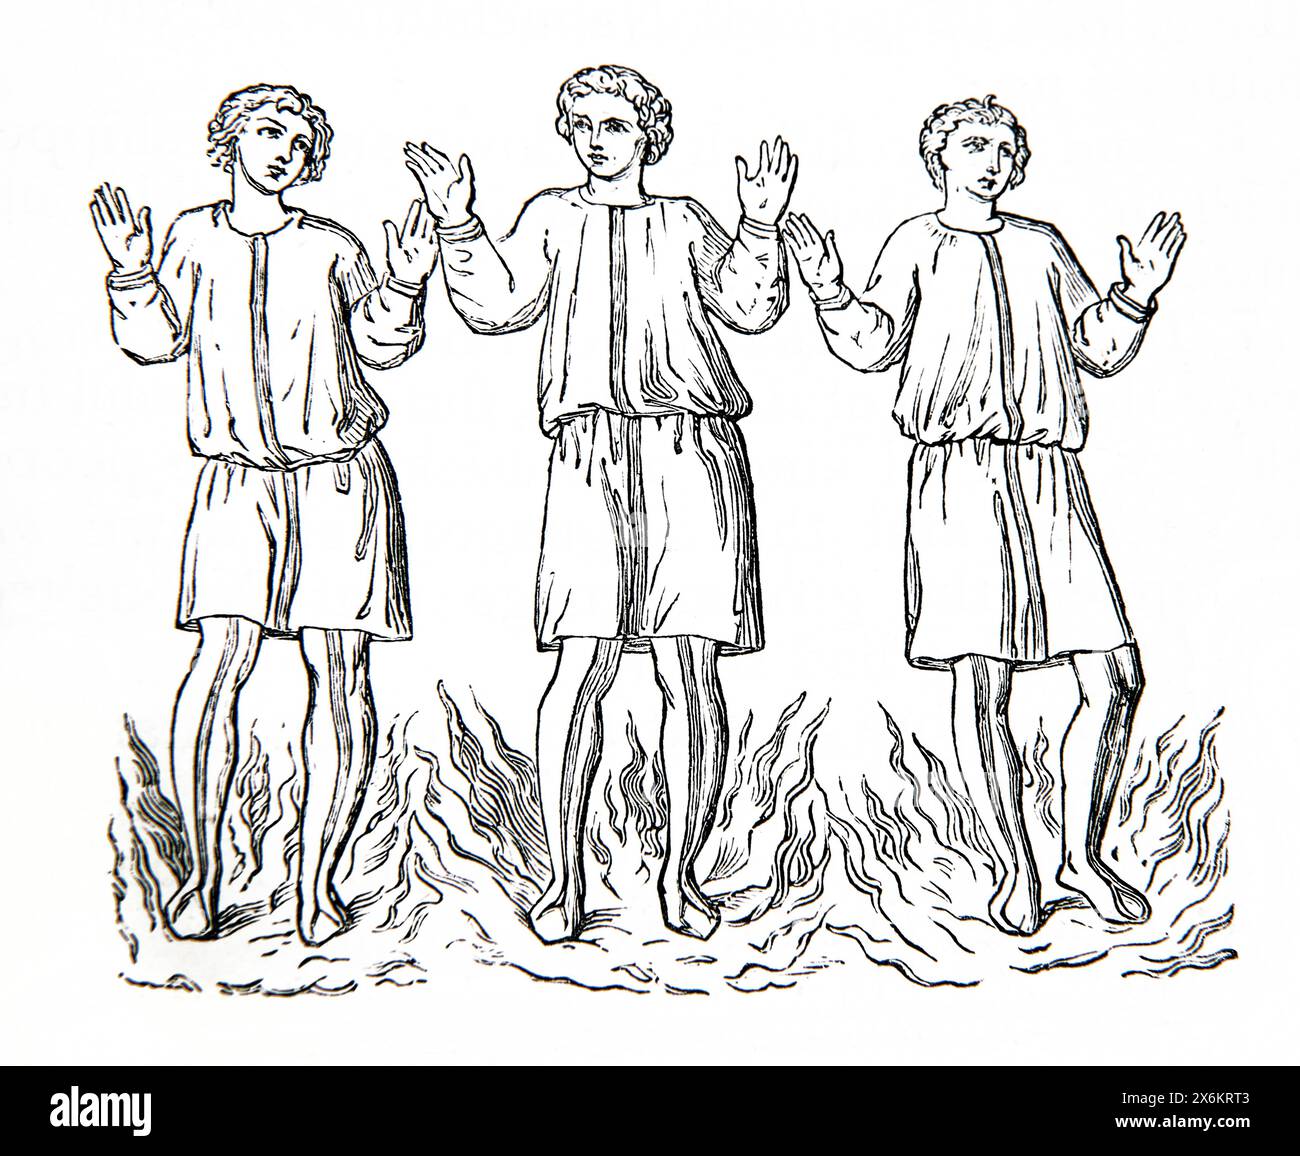 Wood Engraving of the Three Hebrews Mesach, Shadrach and Abed-nego in the Fiery Furnace After Refusing to Bow down and Worship the King's Golden idol Stock Photo